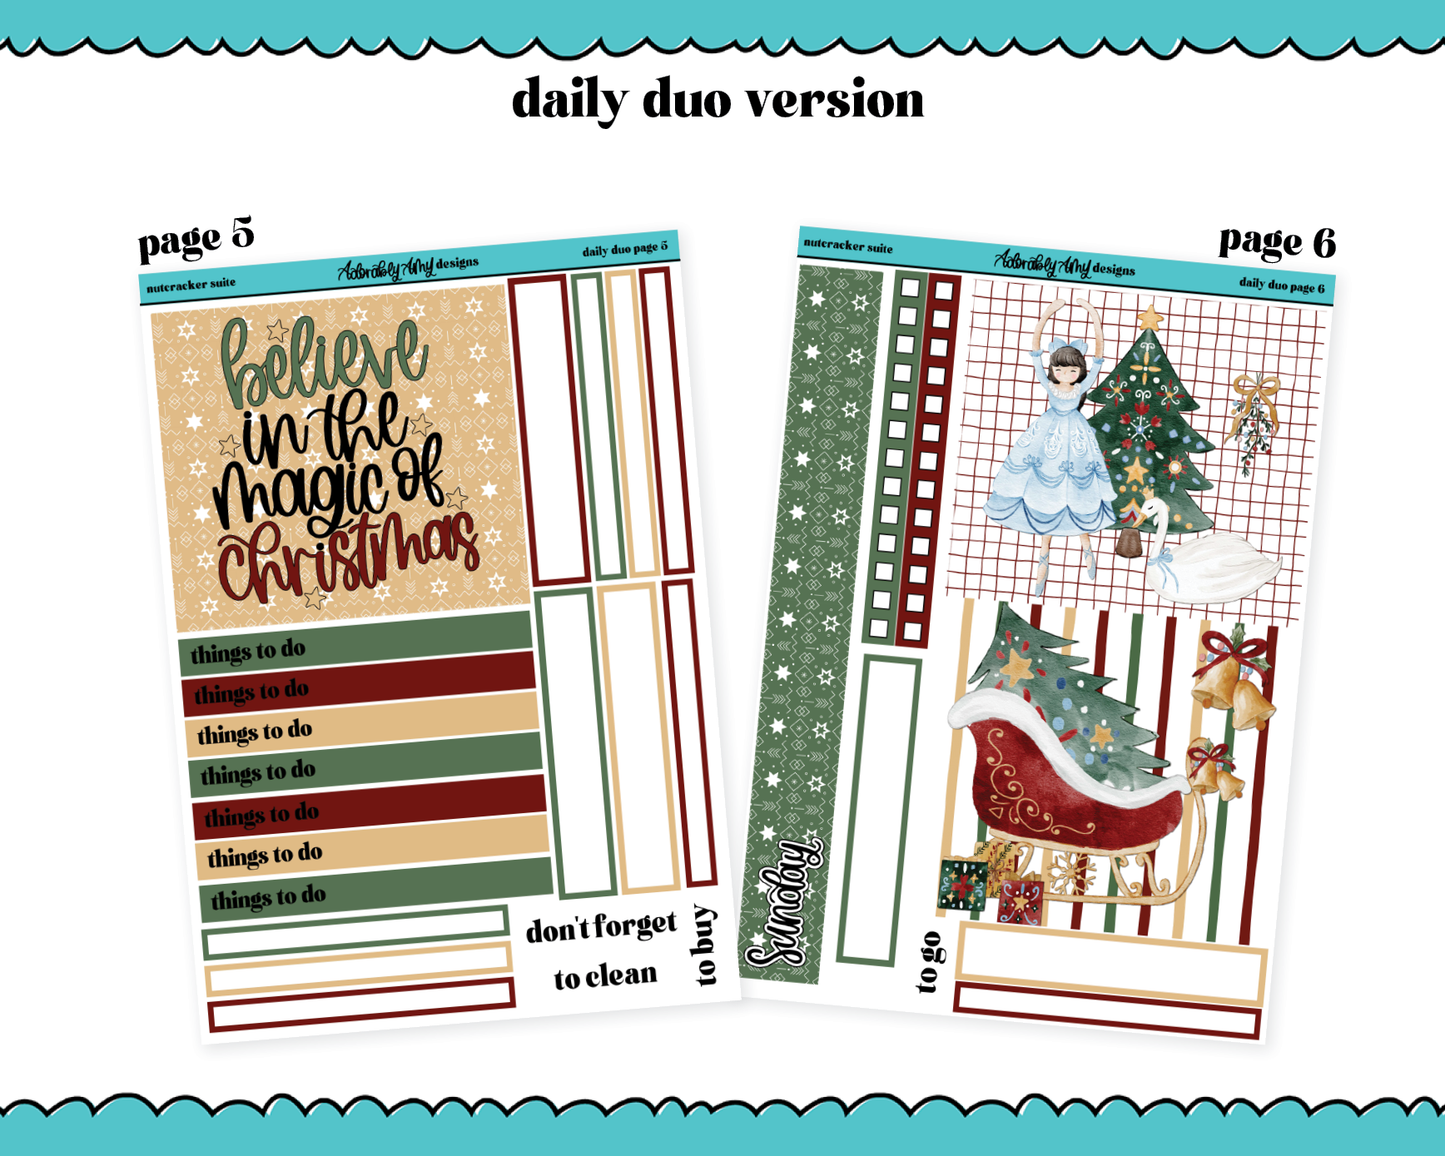 Daily Duo Nutcracker Suite Christmas Themed Weekly Planner Sticker Kit for Daily Duo Planner